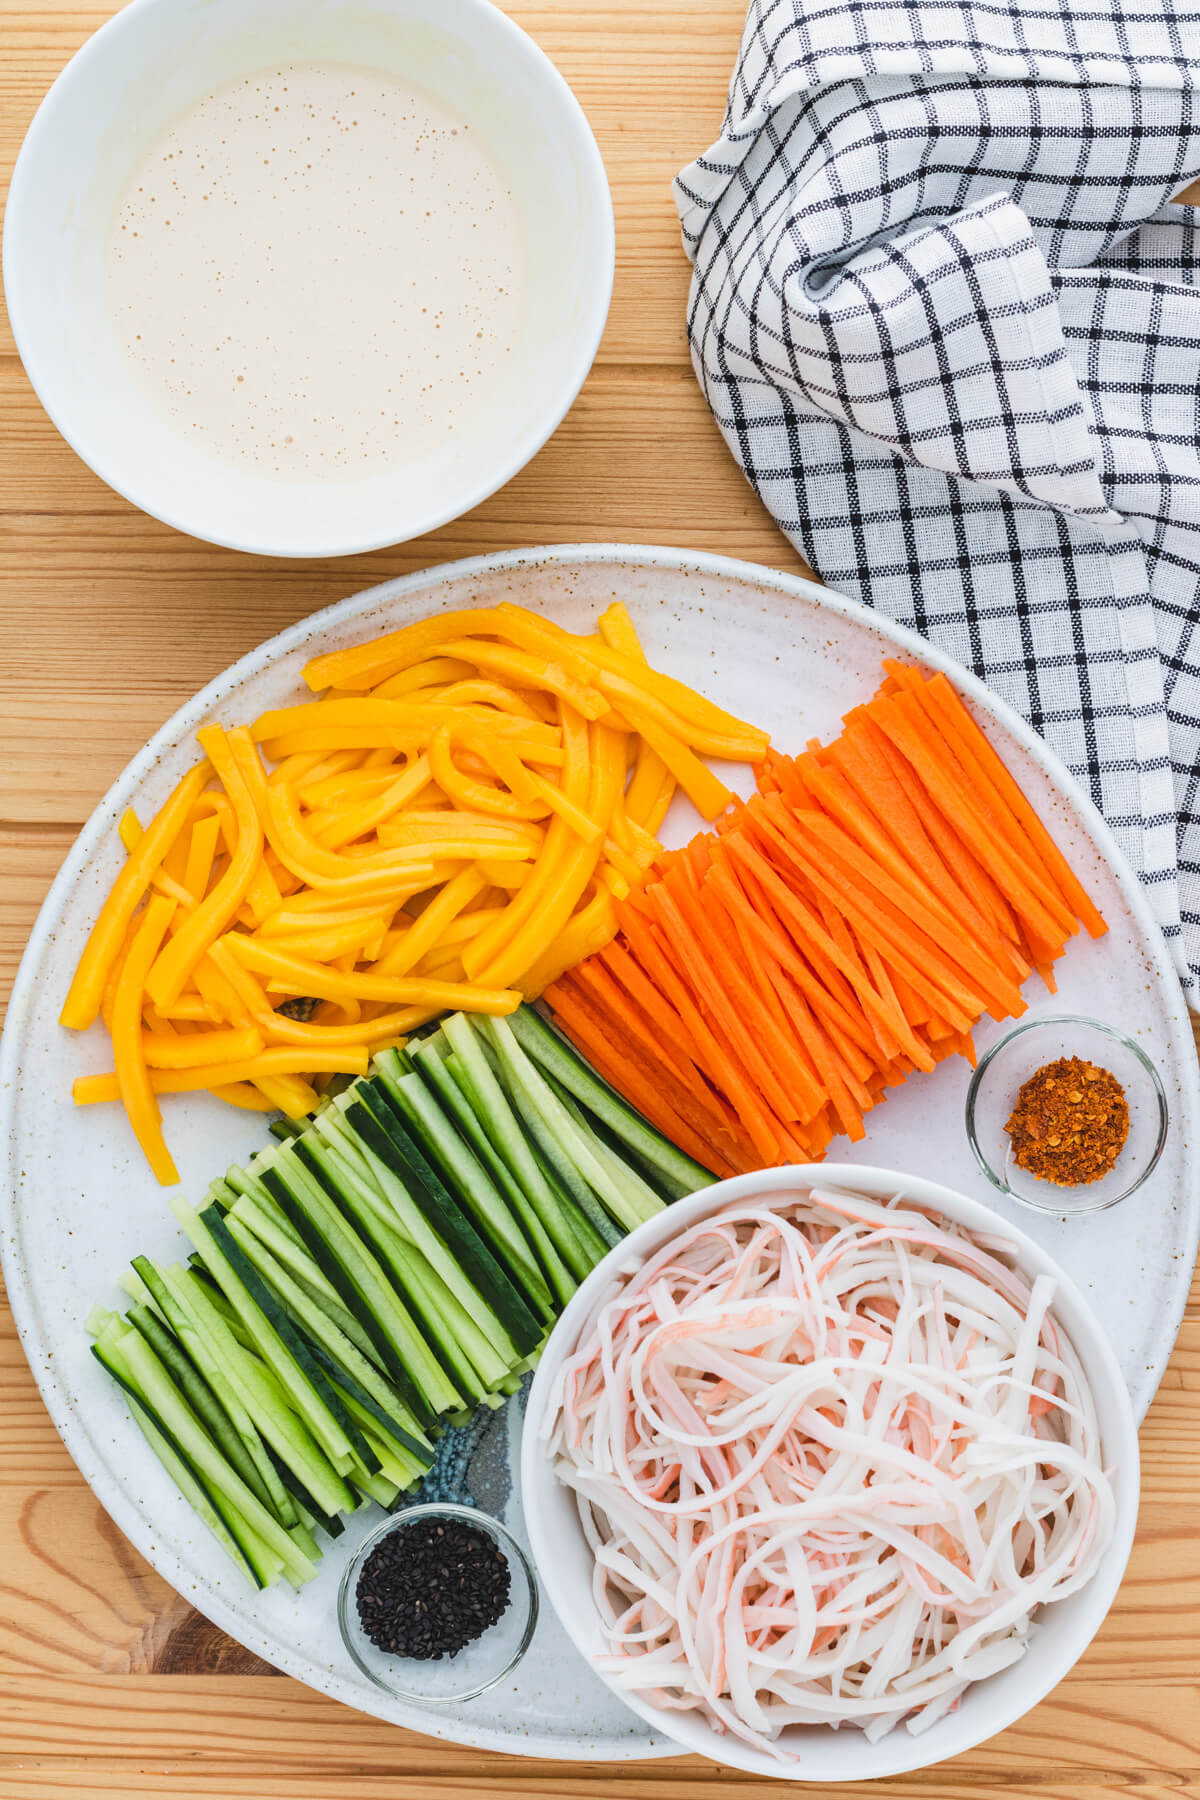 Chopped ingredients for Kani Salad arranged on a platter beside a bowl of Kewpie mayonnaise dressing.